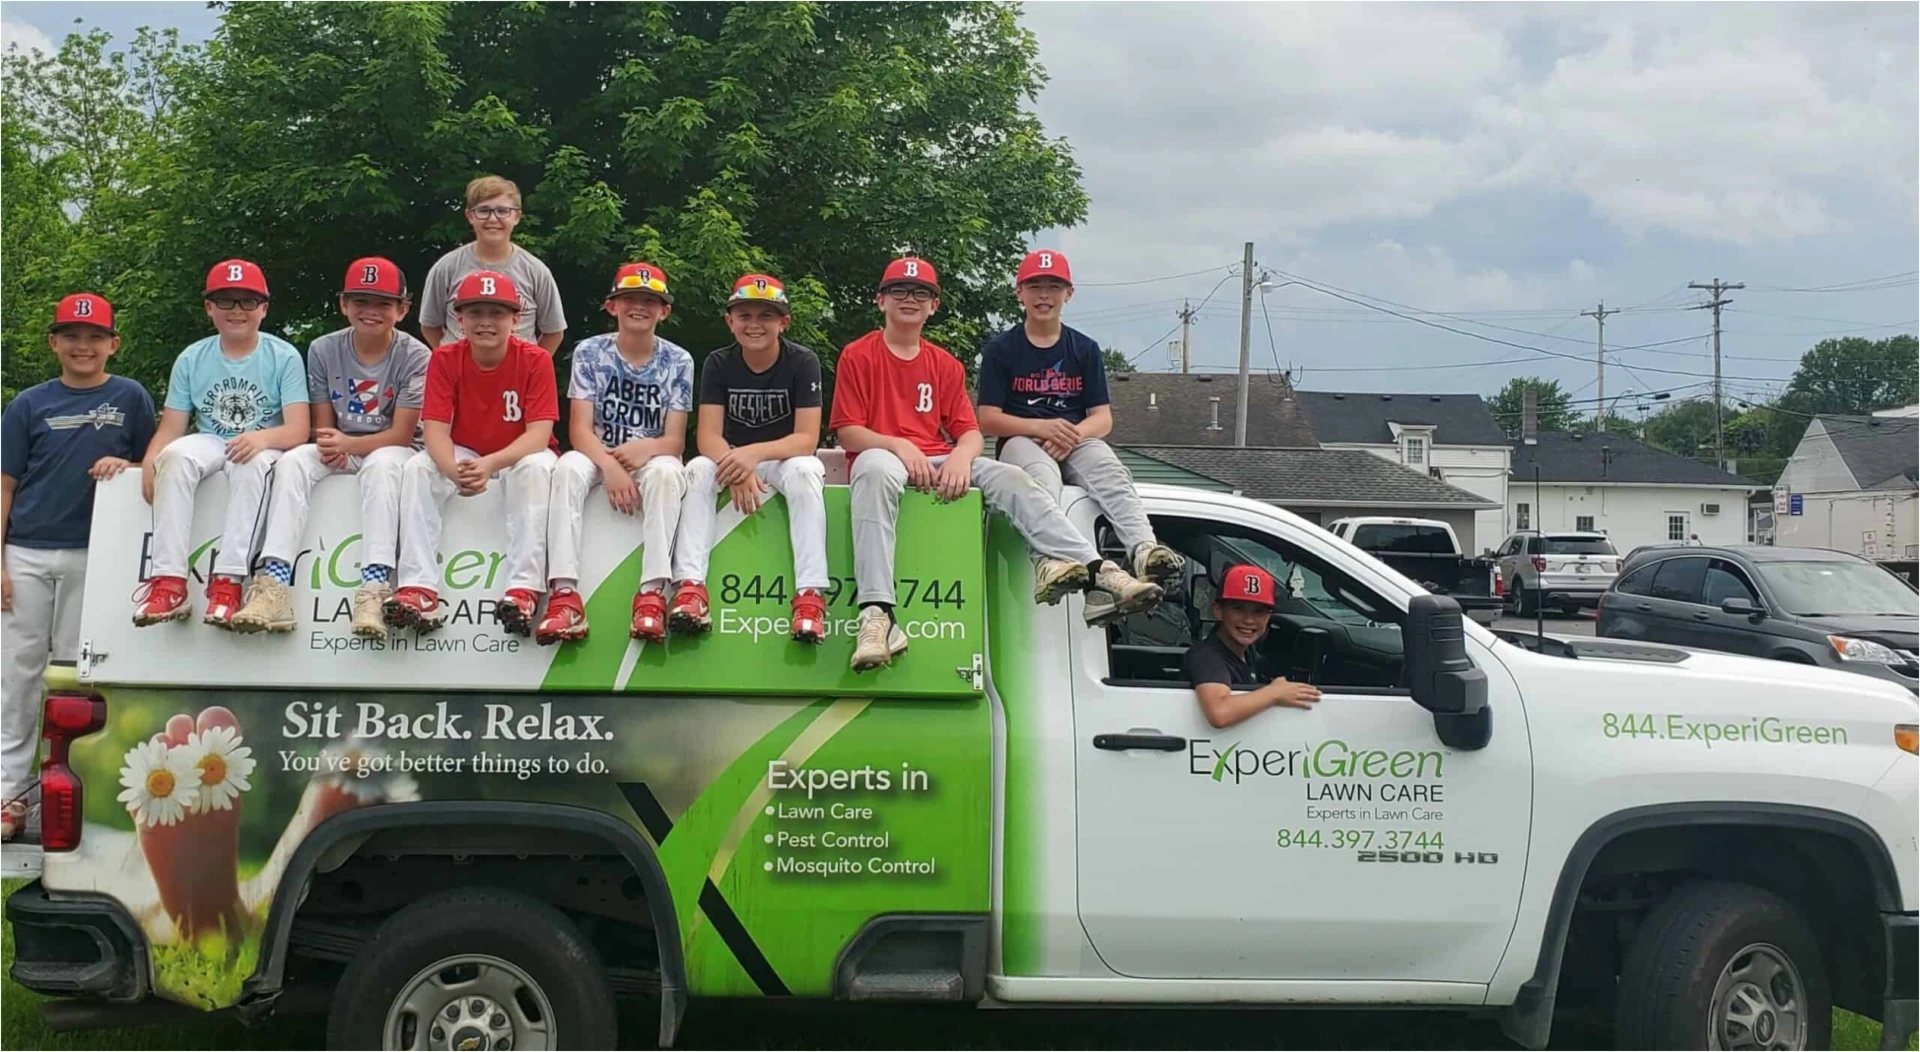 Group of young baseball players wearing red 'B' caps sitting on and around a white and green 'ExperiGreen Lawn Care' truck with a backdrop of buildings and cars under a cloudy sky.